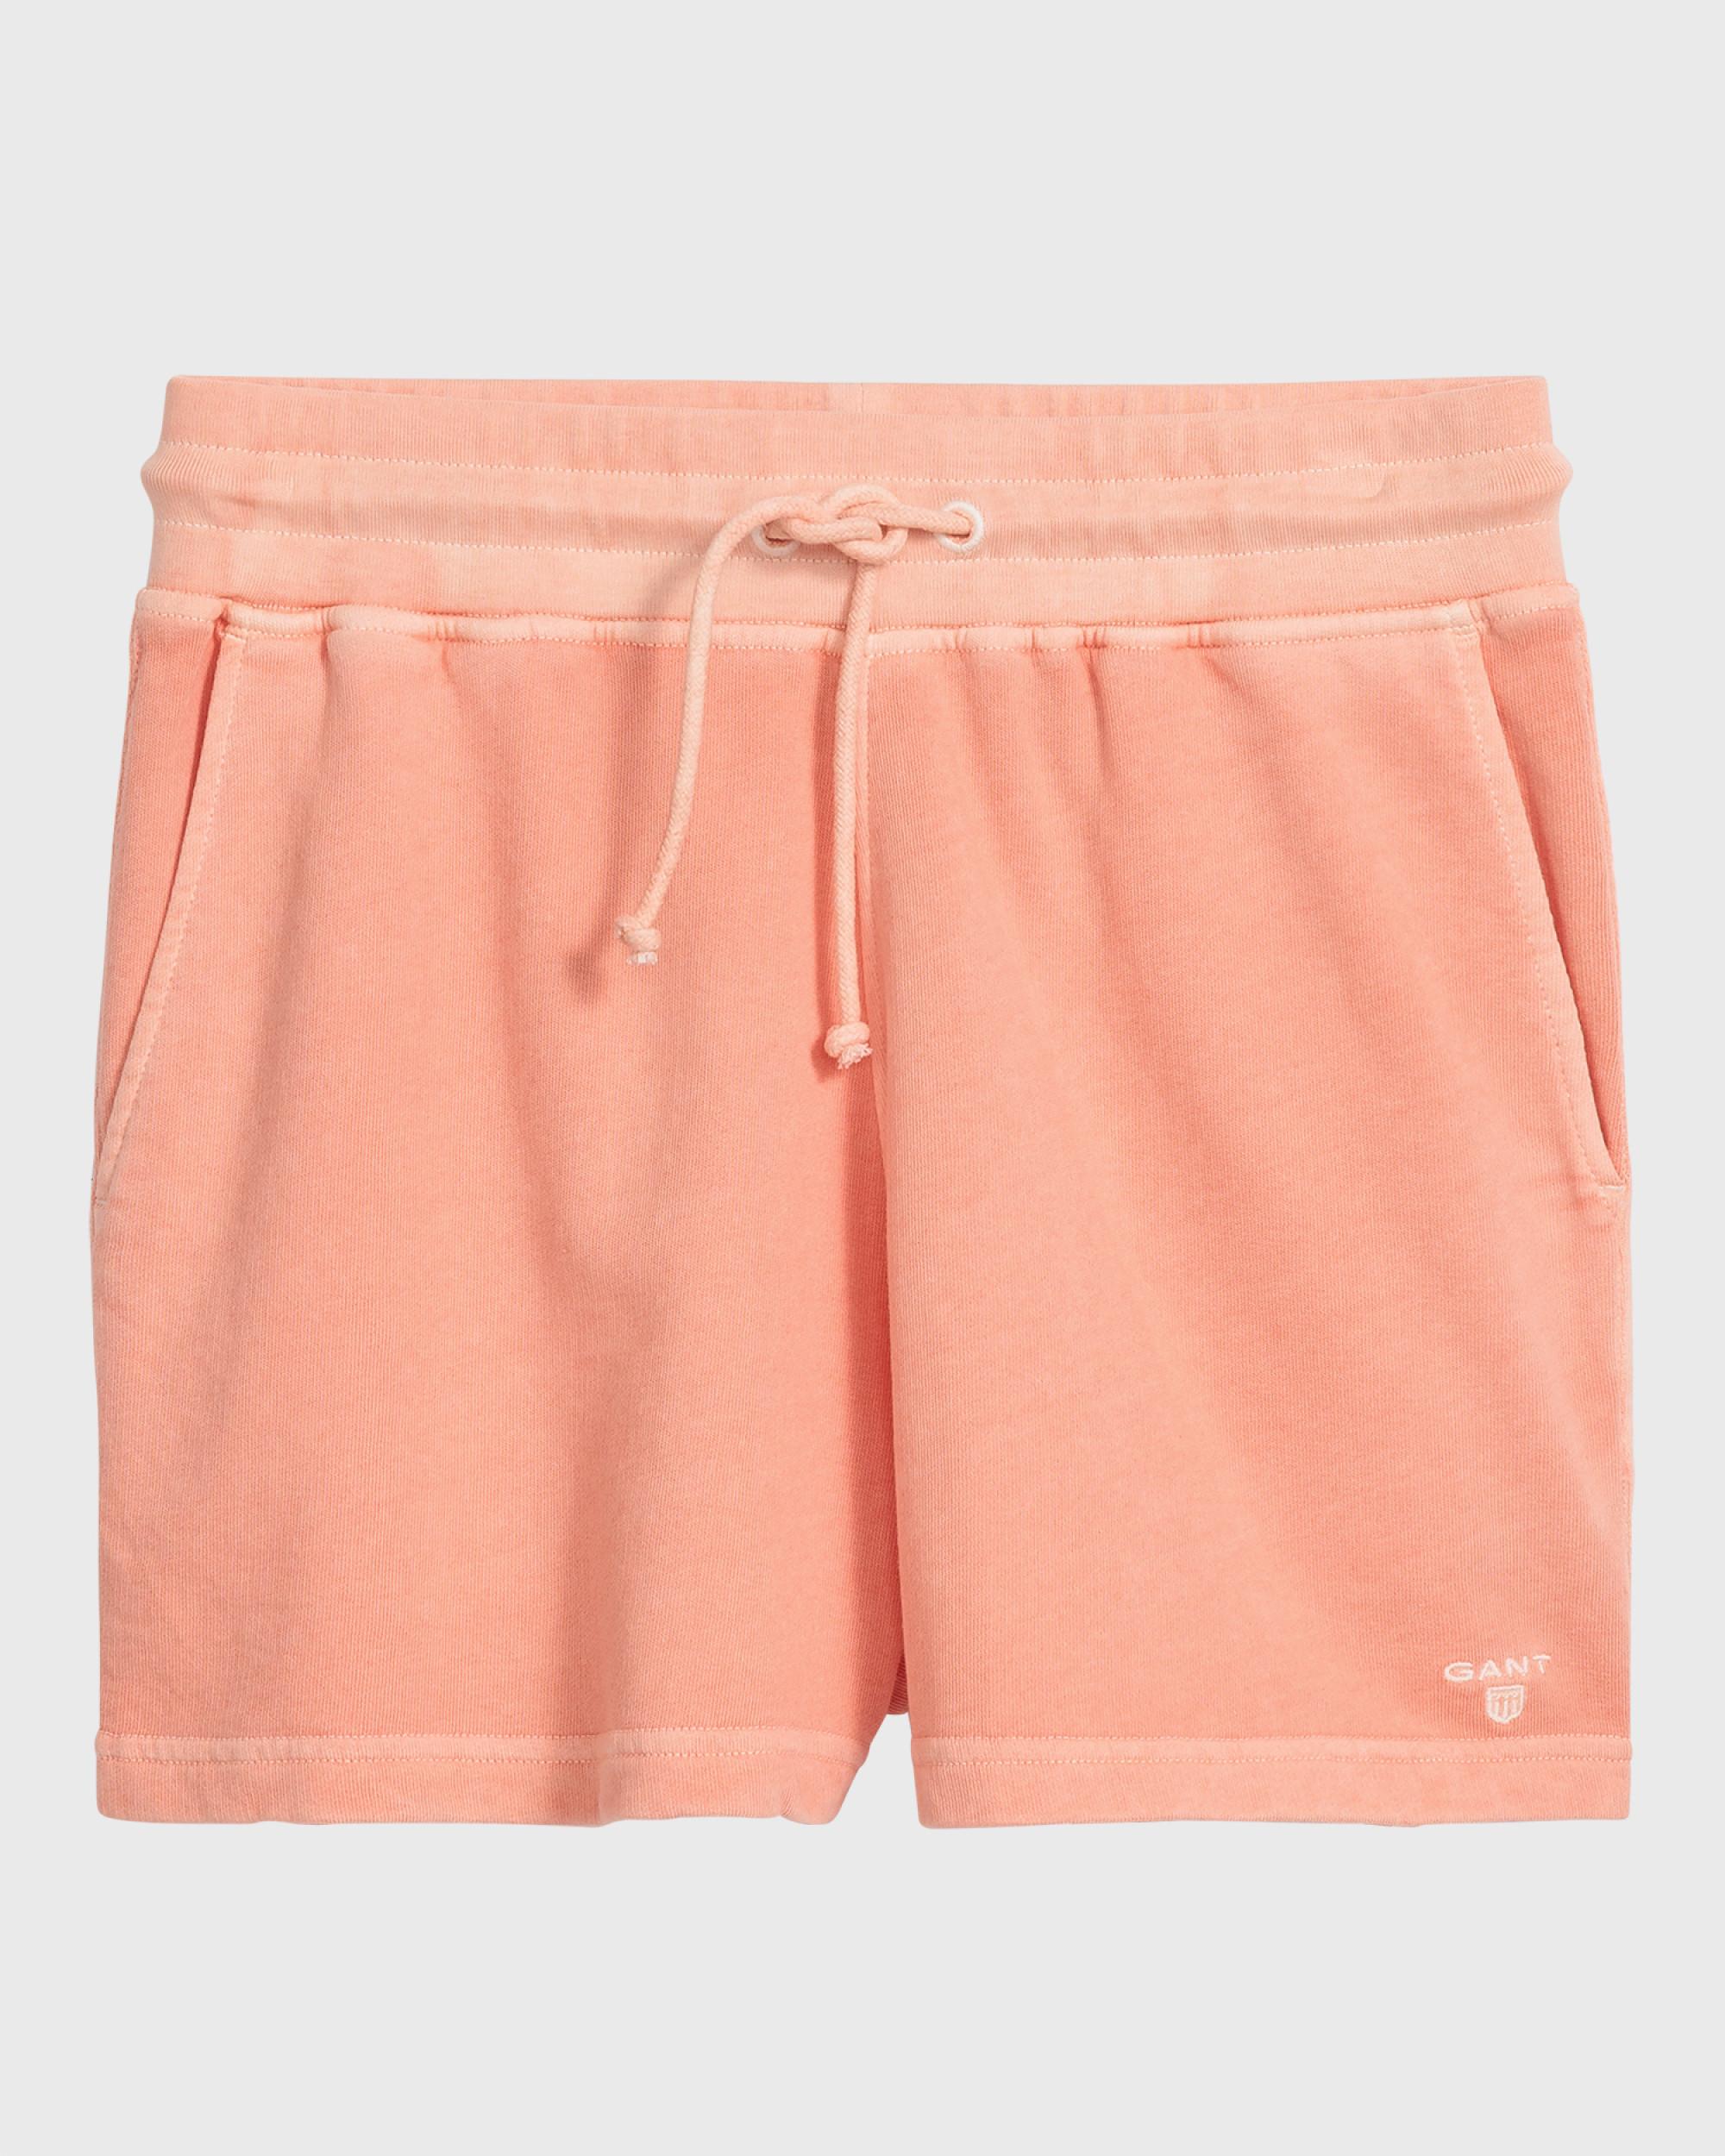 Gant Sunbleached Shorts Online Sale, UP TO 54% OFF